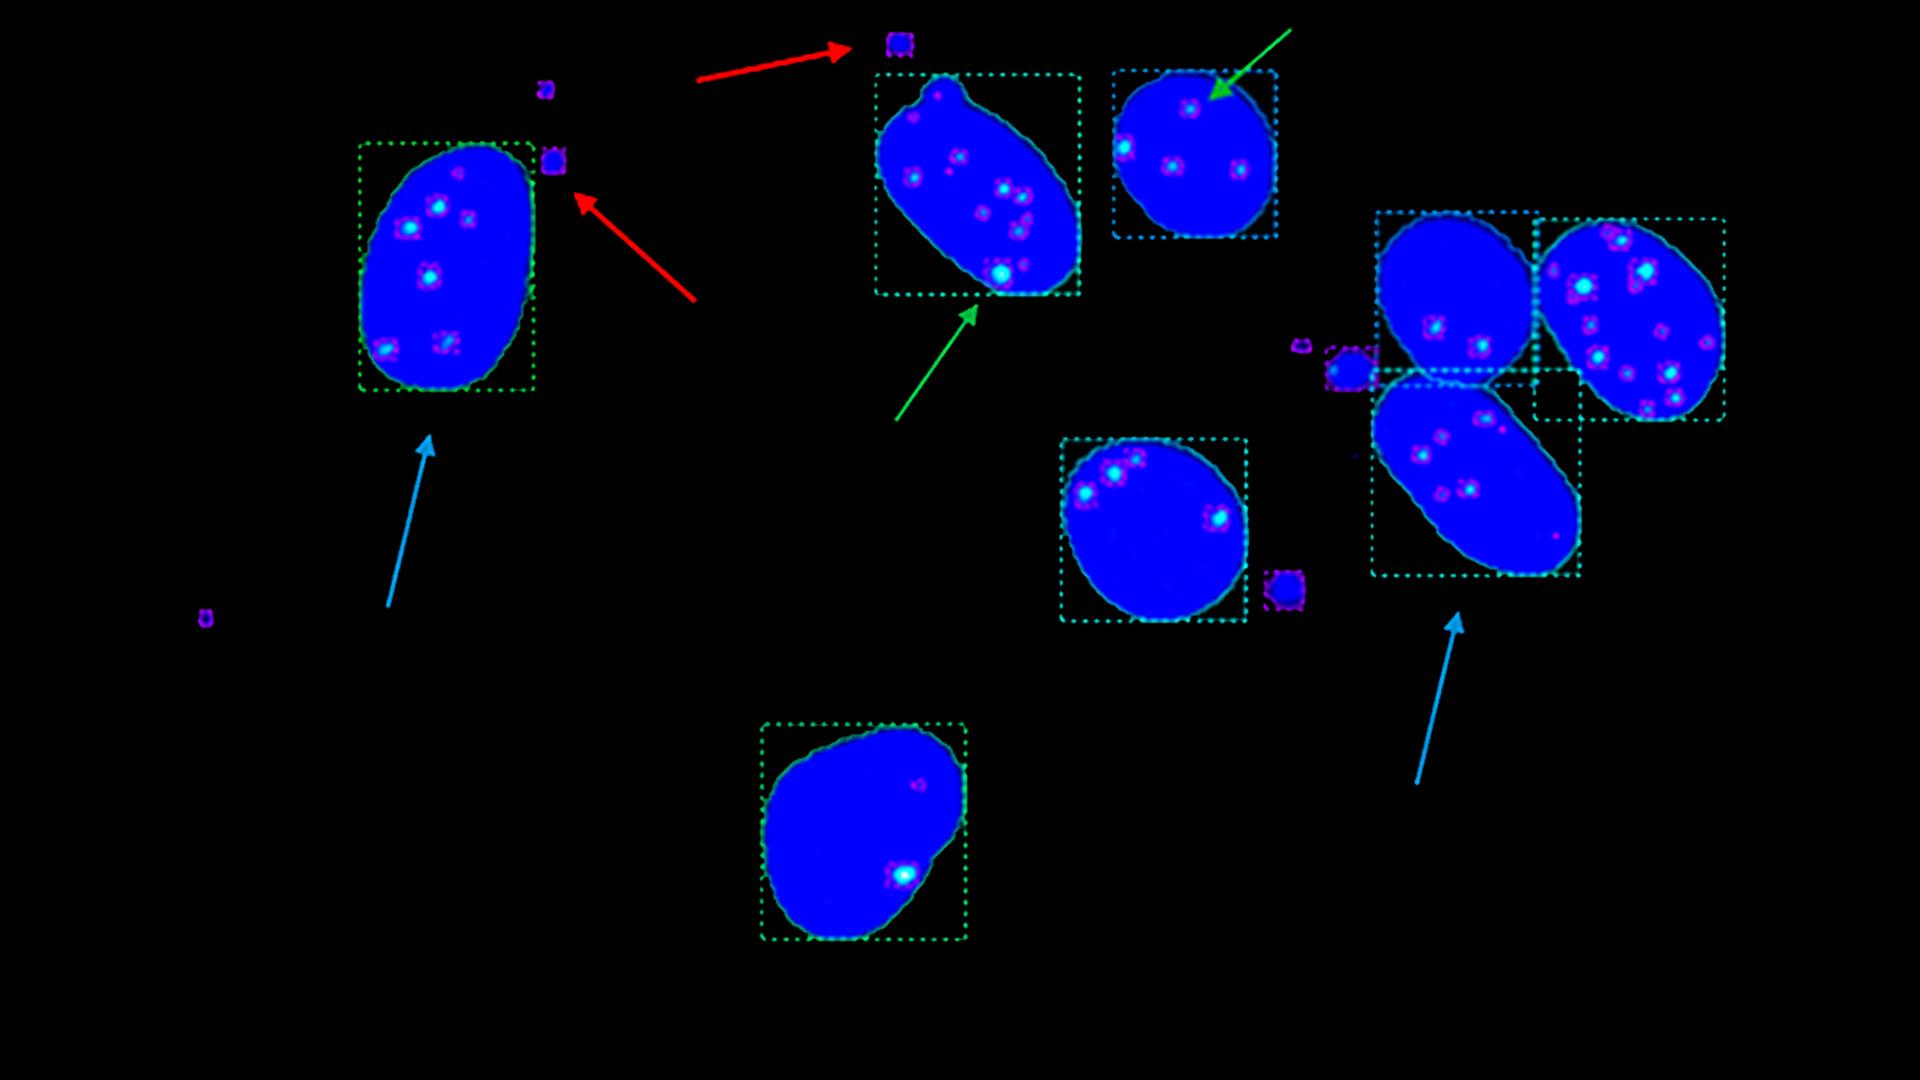 Figure 2A: Representative clip of data set with identified objects as bounding boxes